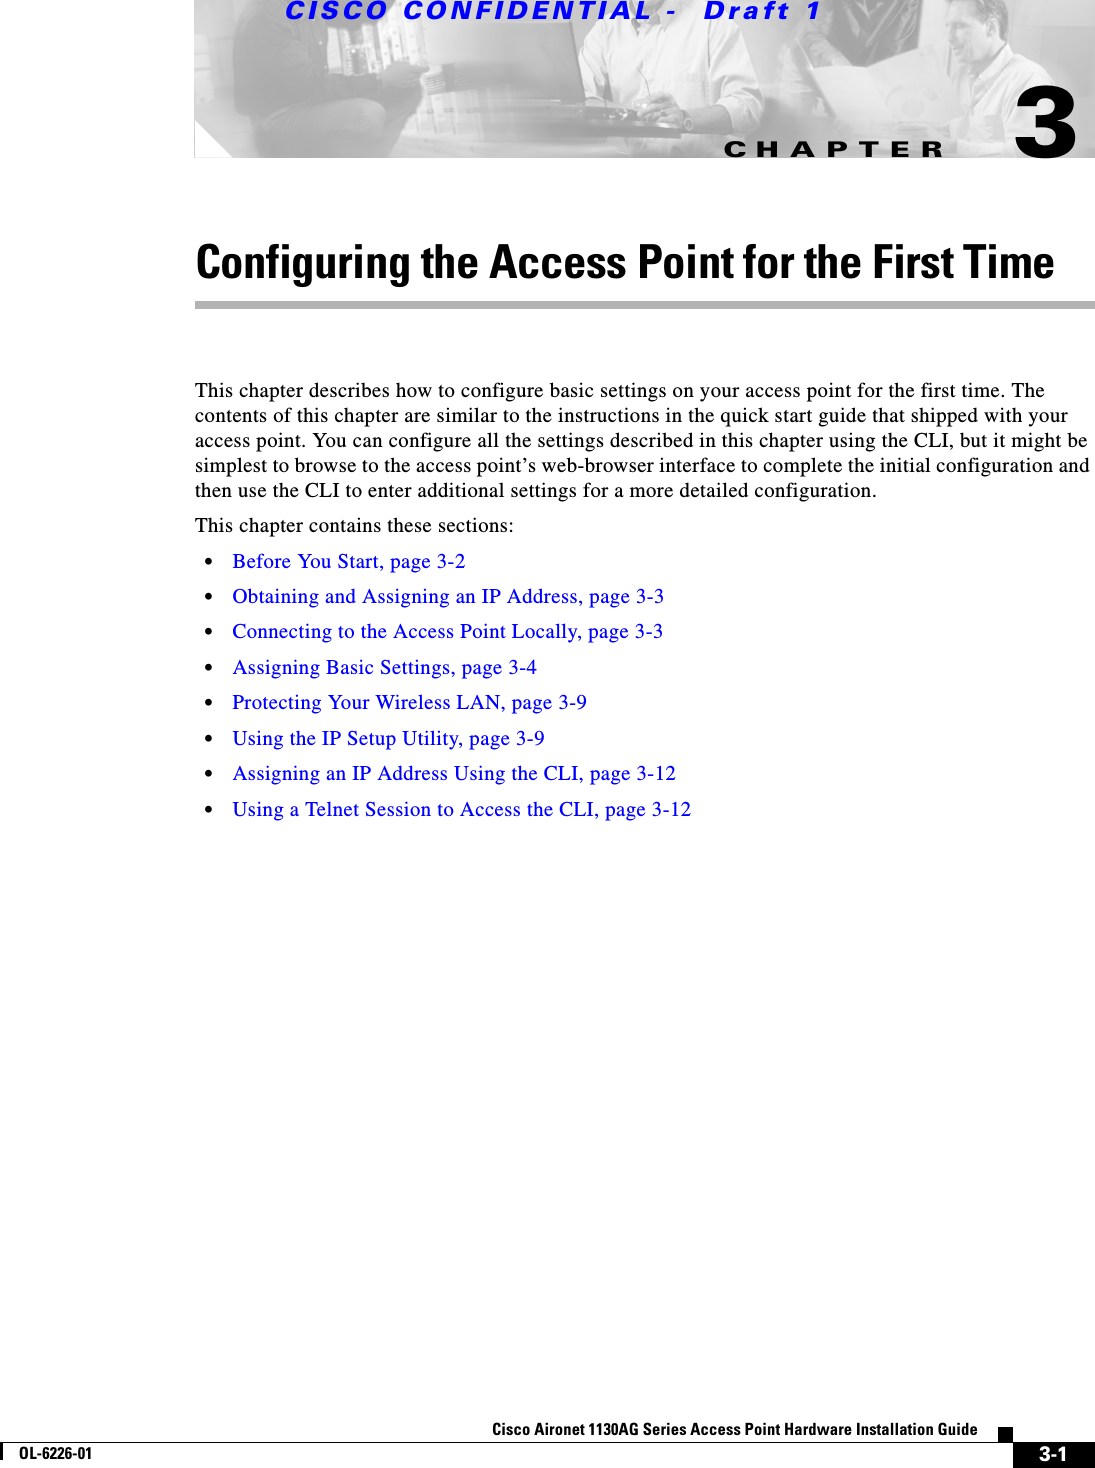 CHAPTER CISCO CONFIDENTIAL -  Draft 13-1Cisco Aironet 1130AG Series Access Point Hardware Installation GuideOL-6226-013Configuring the Access Point for the First TimeThis chapter describes how to configure basic settings on your access point for the first time. The contents of this chapter are similar to the instructions in the quick start guide that shipped with your access point. You can configure all the settings described in this chapter using the CLI, but it might be simplest to browse to the access point’s web-browser interface to complete the initial configuration and then use the CLI to enter additional settings for a more detailed configuration. This chapter contains these sections:•Before You Start, page 3-2•Obtaining and Assigning an IP Address, page 3-3•Connecting to the Access Point Locally, page 3-3•Assigning Basic Settings, page 3-4•Protecting Your Wireless LAN, page 3-9•Using the IP Setup Utility, page 3-9•Assigning an IP Address Using the CLI, page 3-12•Using a Telnet Session to Access the CLI, page 3-12